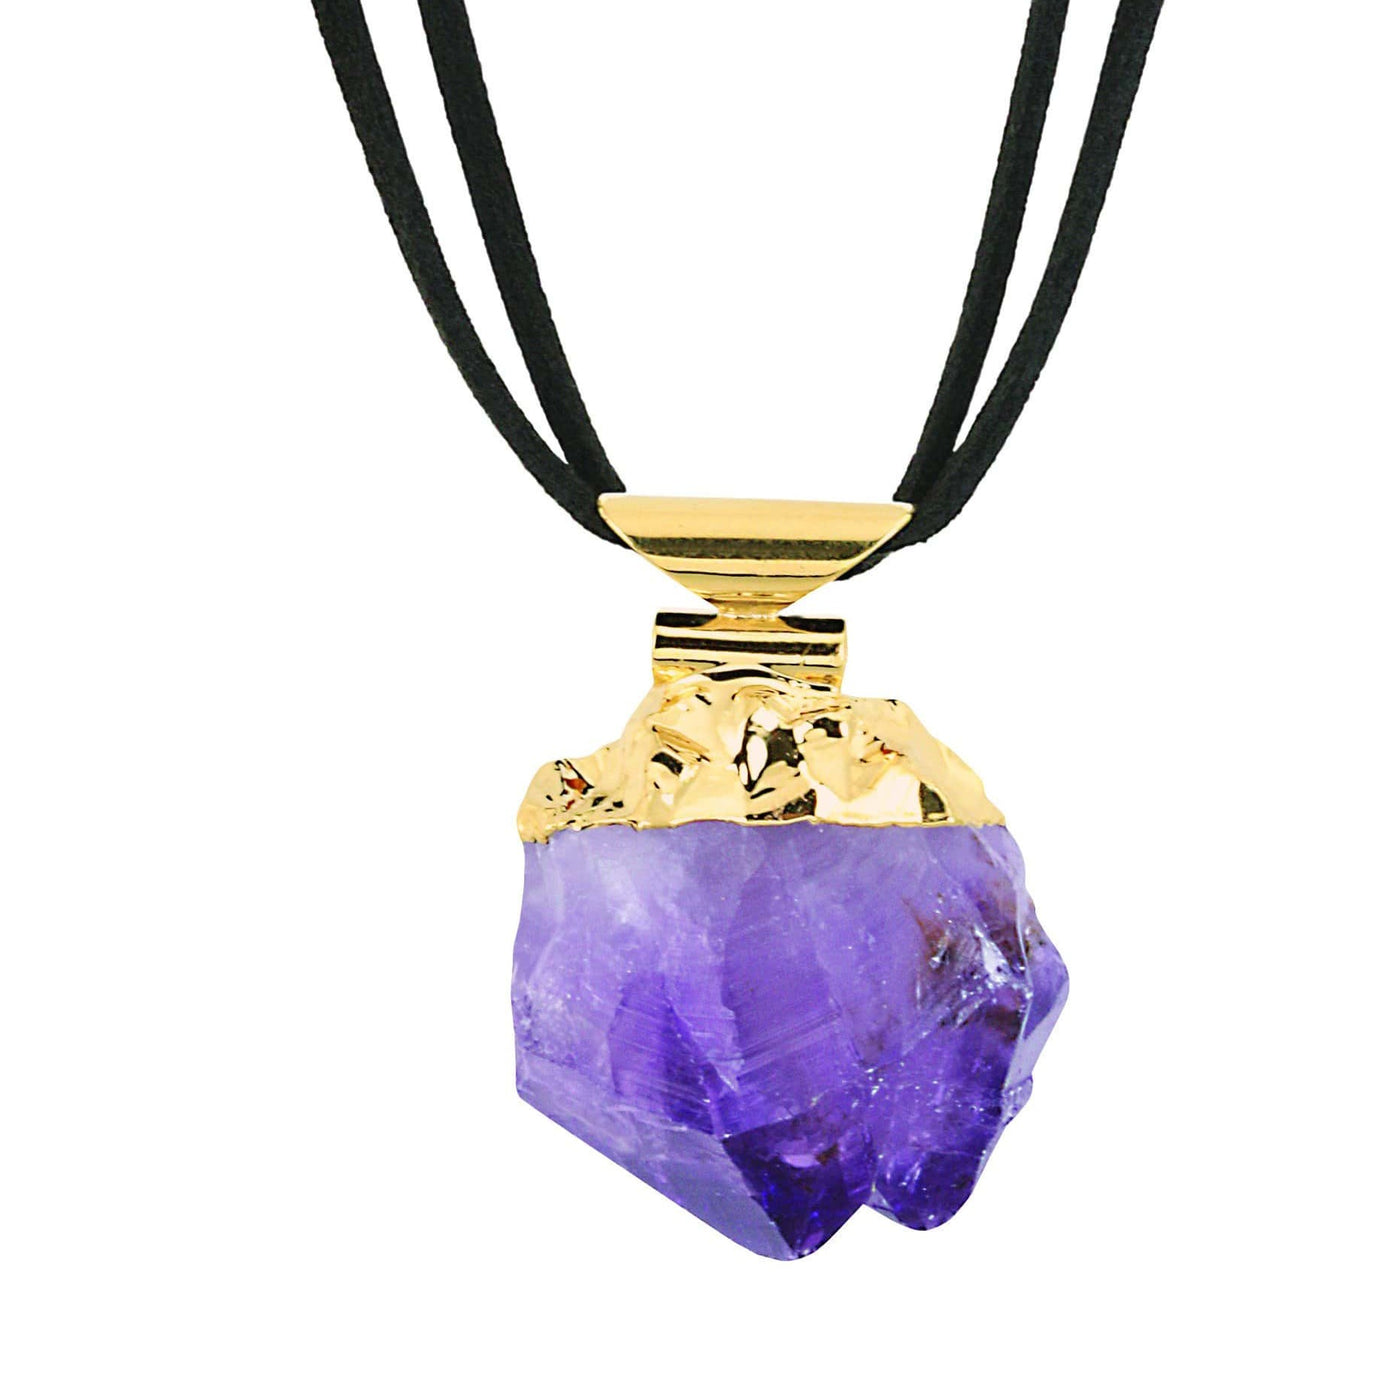 One amethyst necklace with a gold top and on a black double cord.